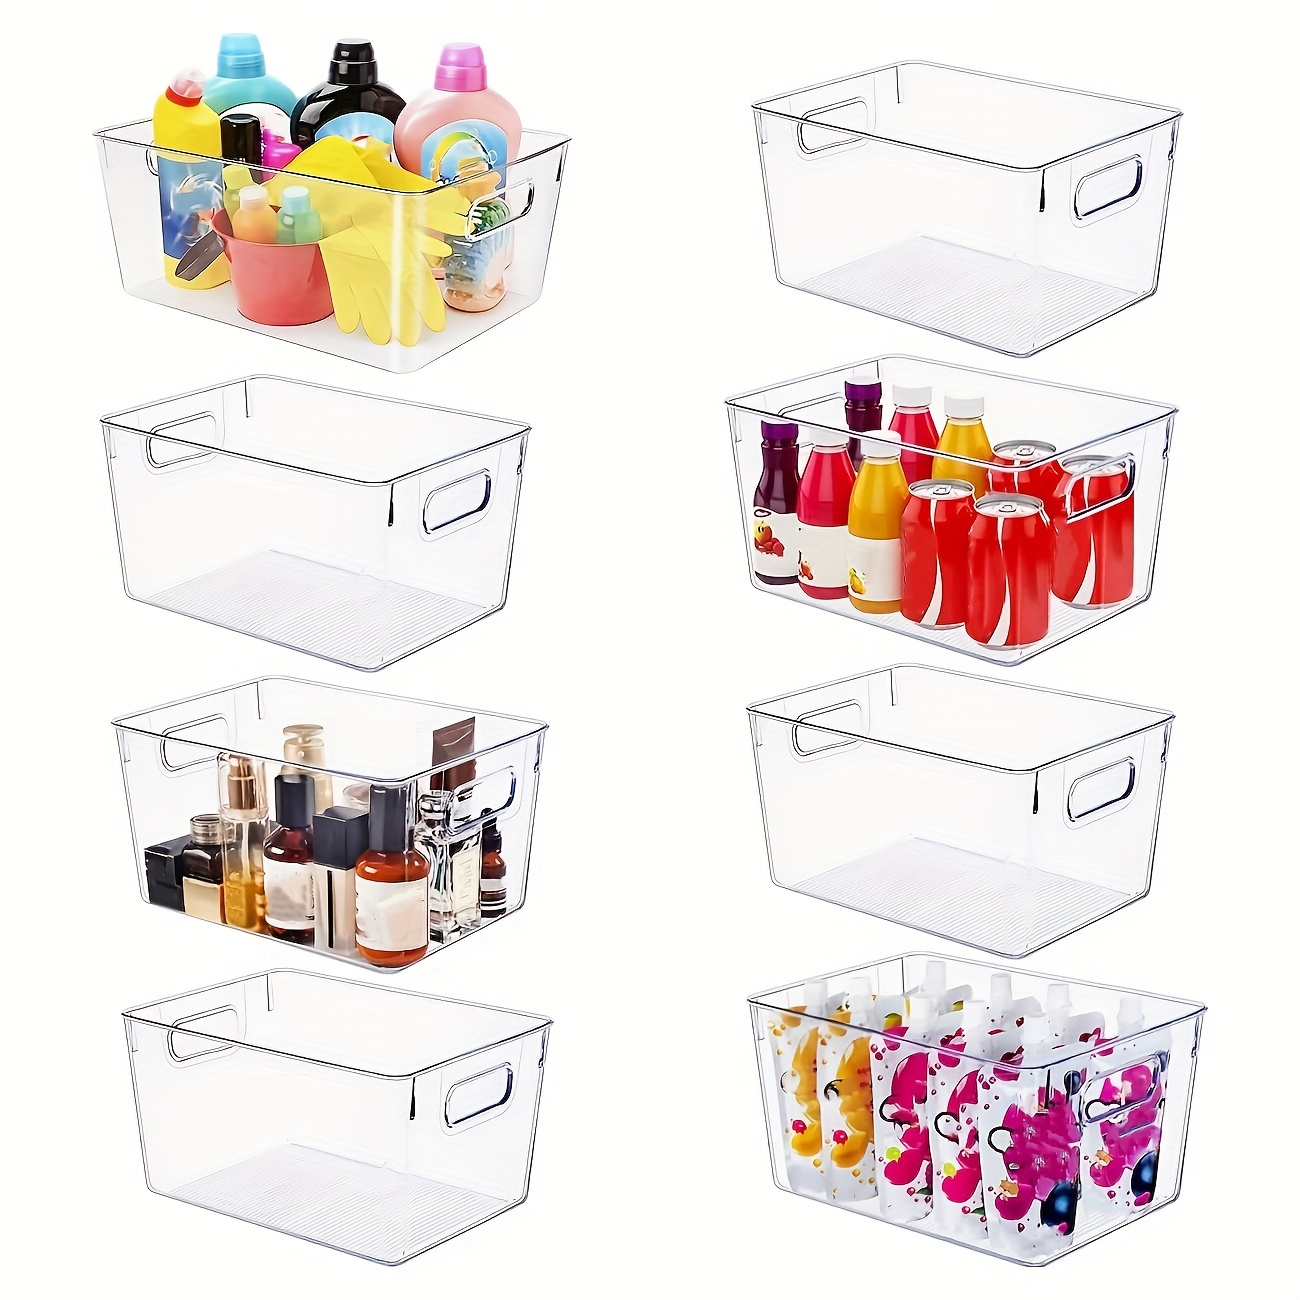 

Set Of 8 Large Clear Plastic Storage Bins (8l), Storage Containers For Pantry Organization And Kitchen Storage Bins, Home Edit And Cabinet Organizers